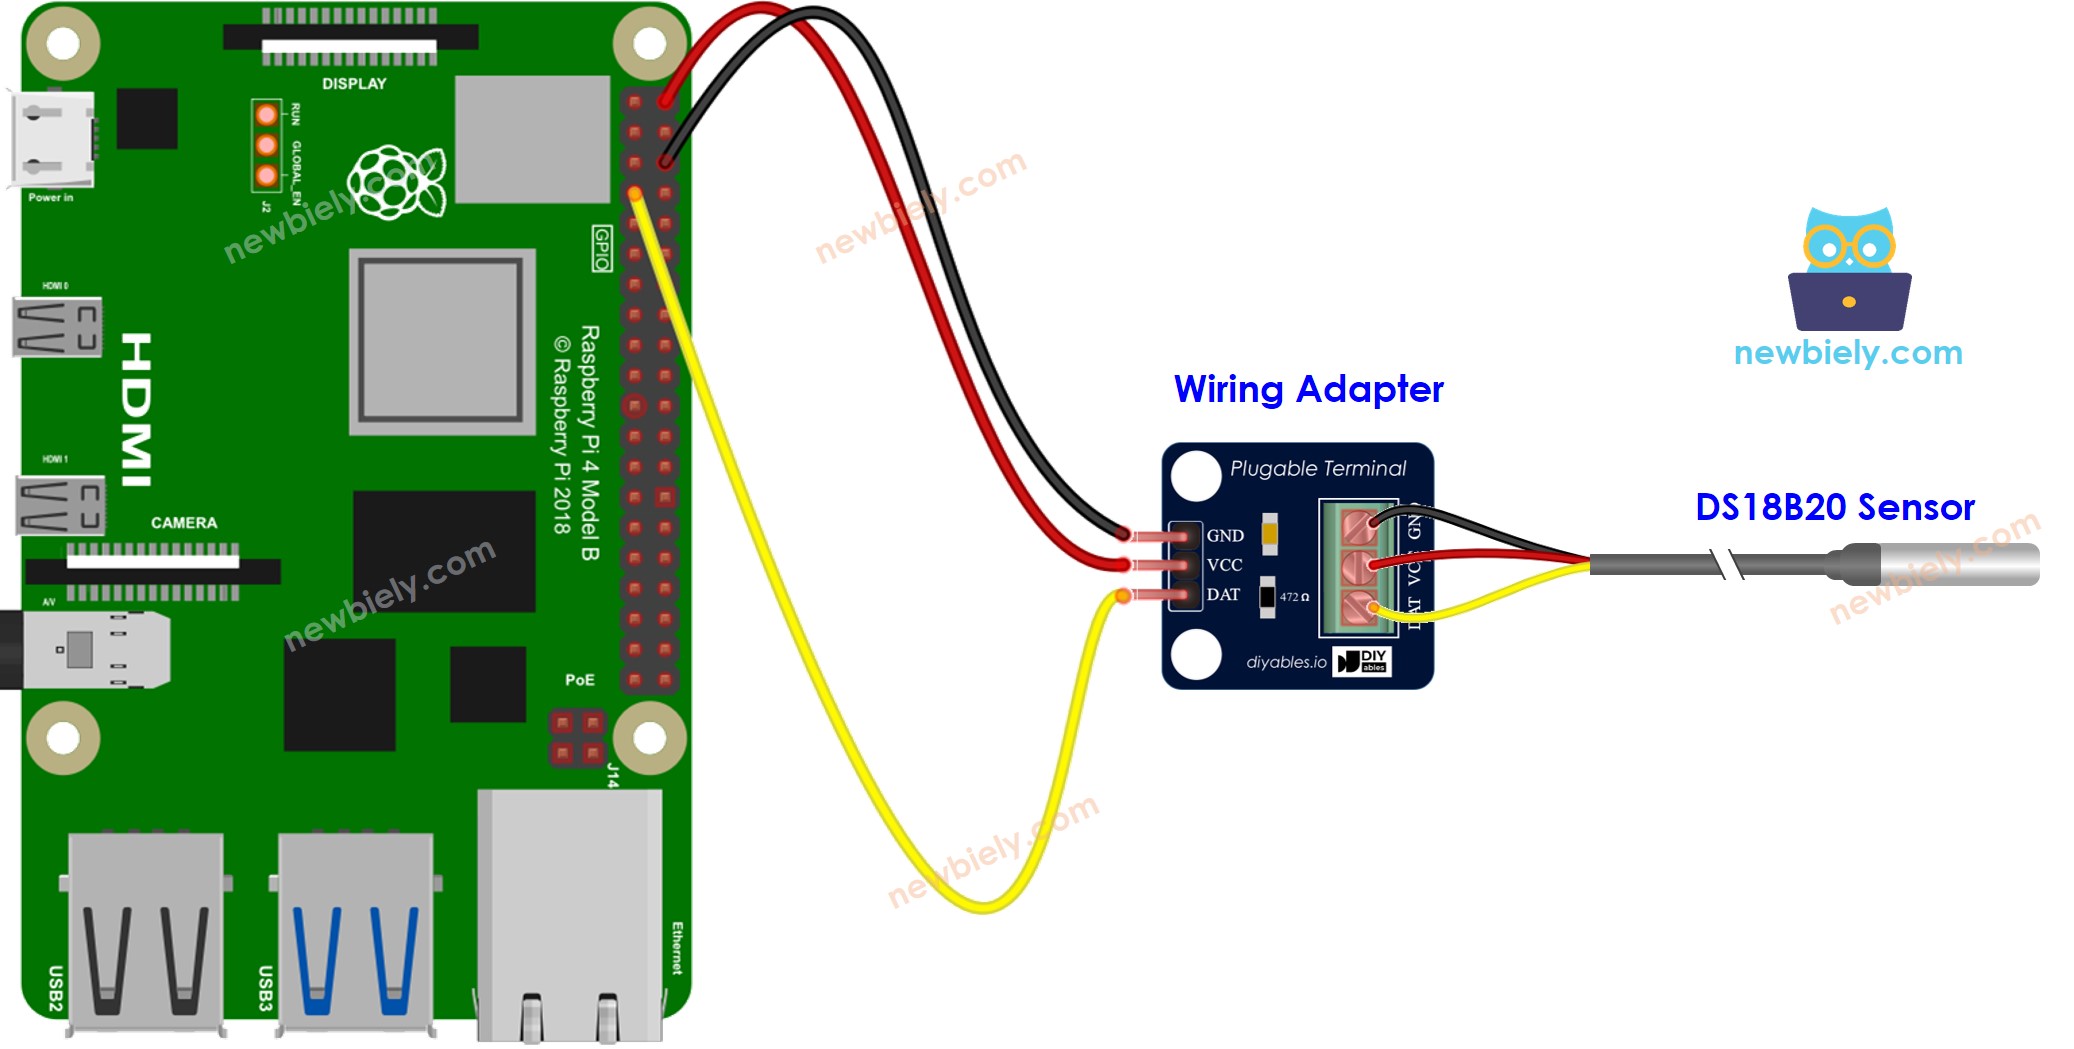 The wiring diagram between Raspberry Pi and DS18B20